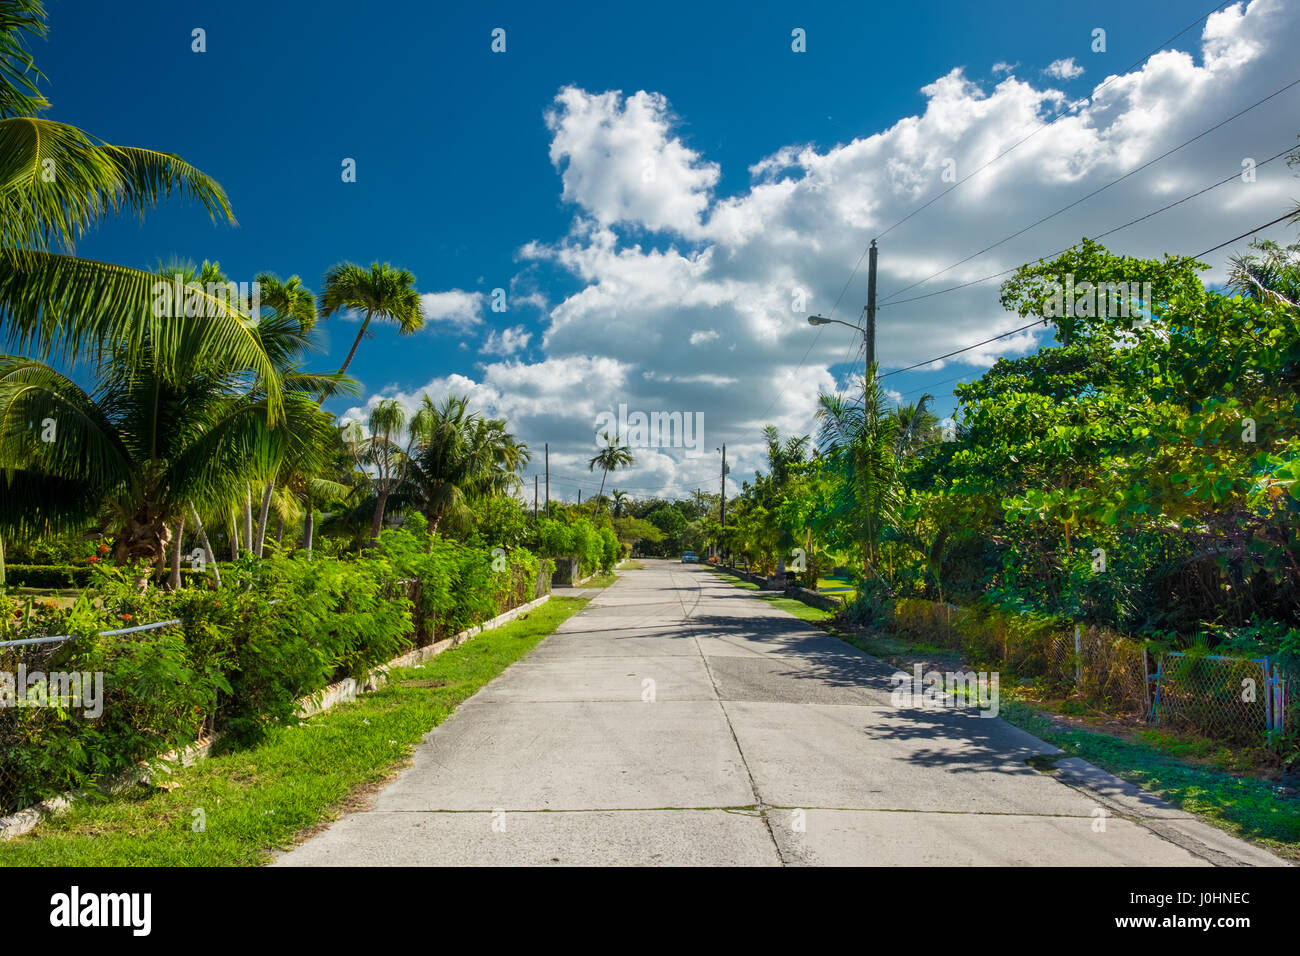 Street in the Caribbean with a lush vegetation on both side of the road, Grand Cayman,  Cayman Islands Stock Photo